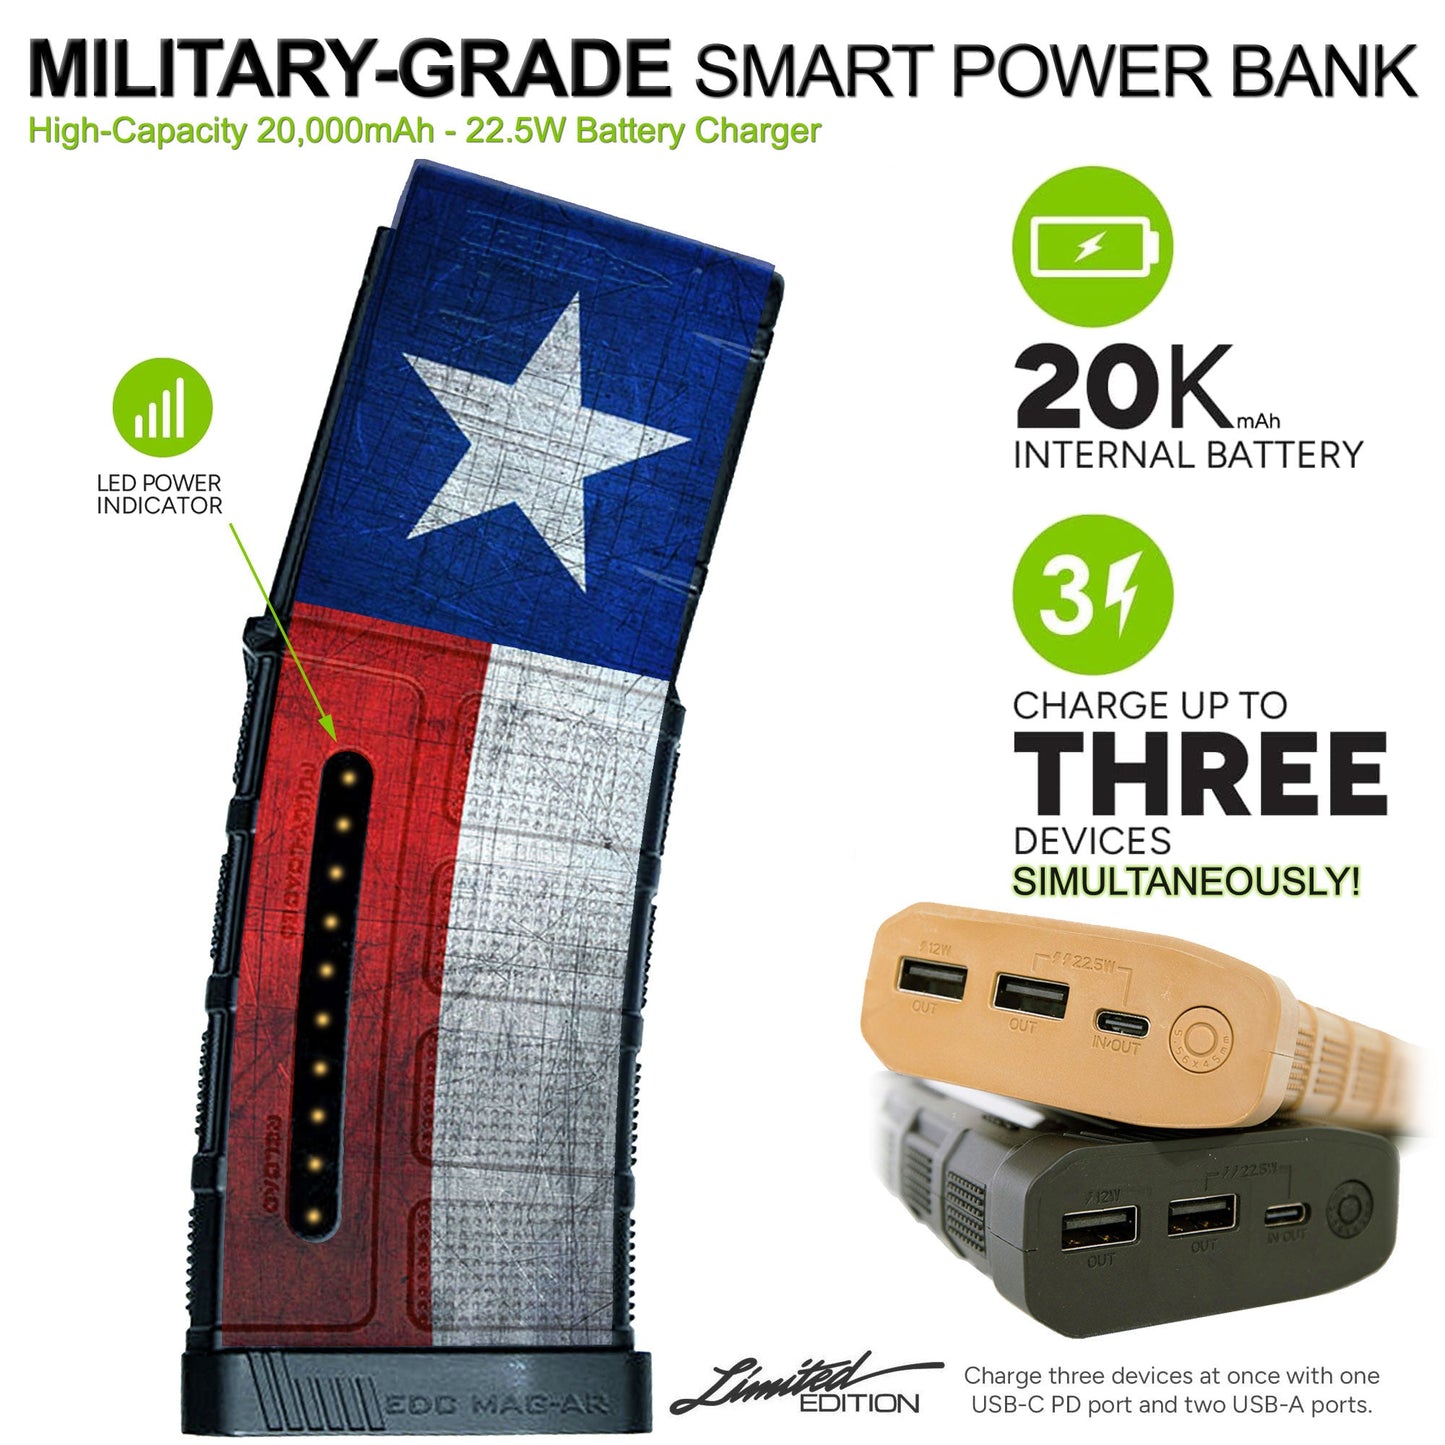 Limited Edition Custom Printed 20,000mAh Military Grade Smart Powerbank Battery Charger with 2-USB + USB-C Ports